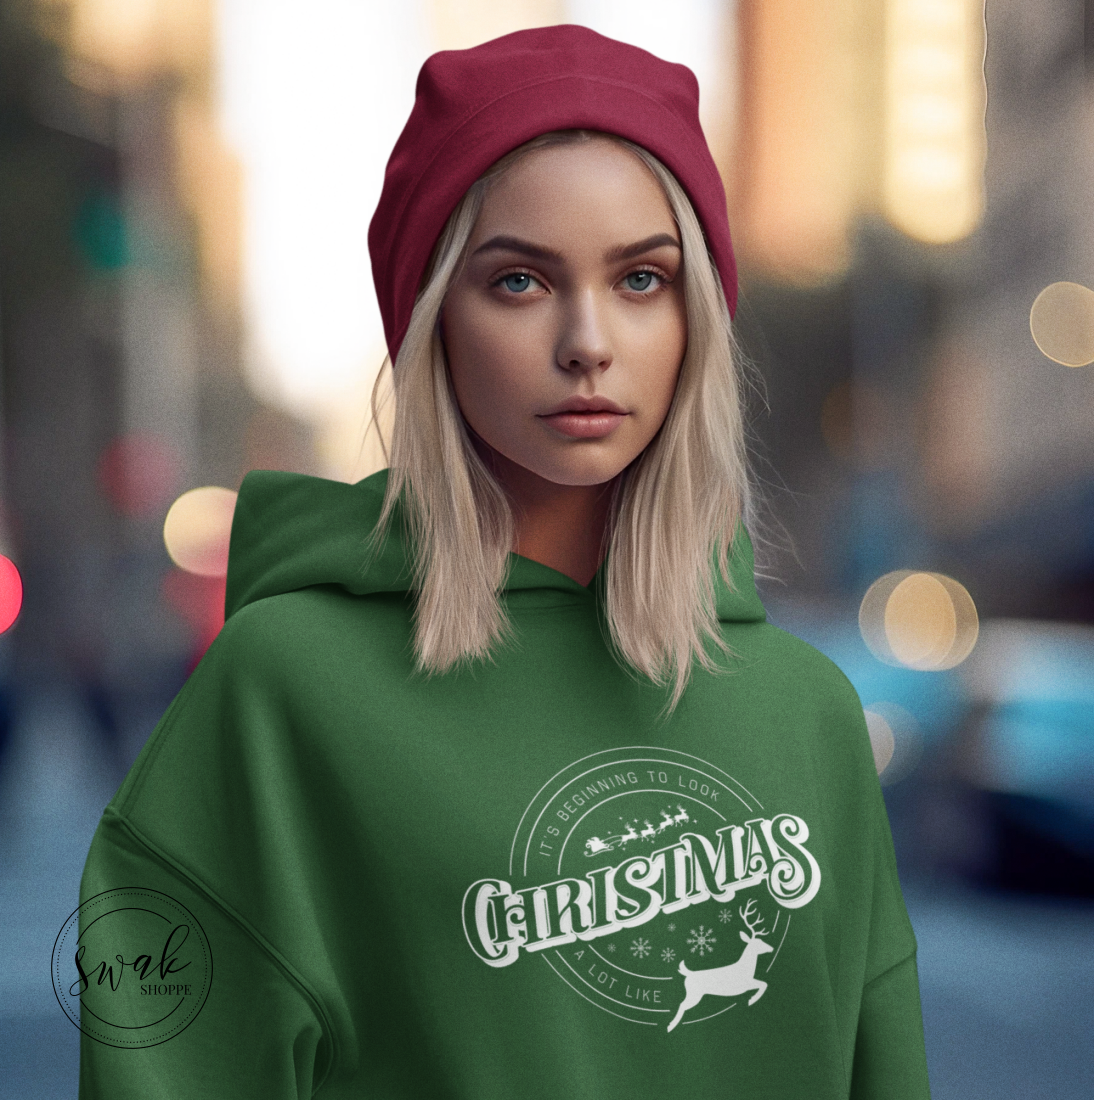 Its Beginning To Look A Lot Like Christmas Unisex Hoodie